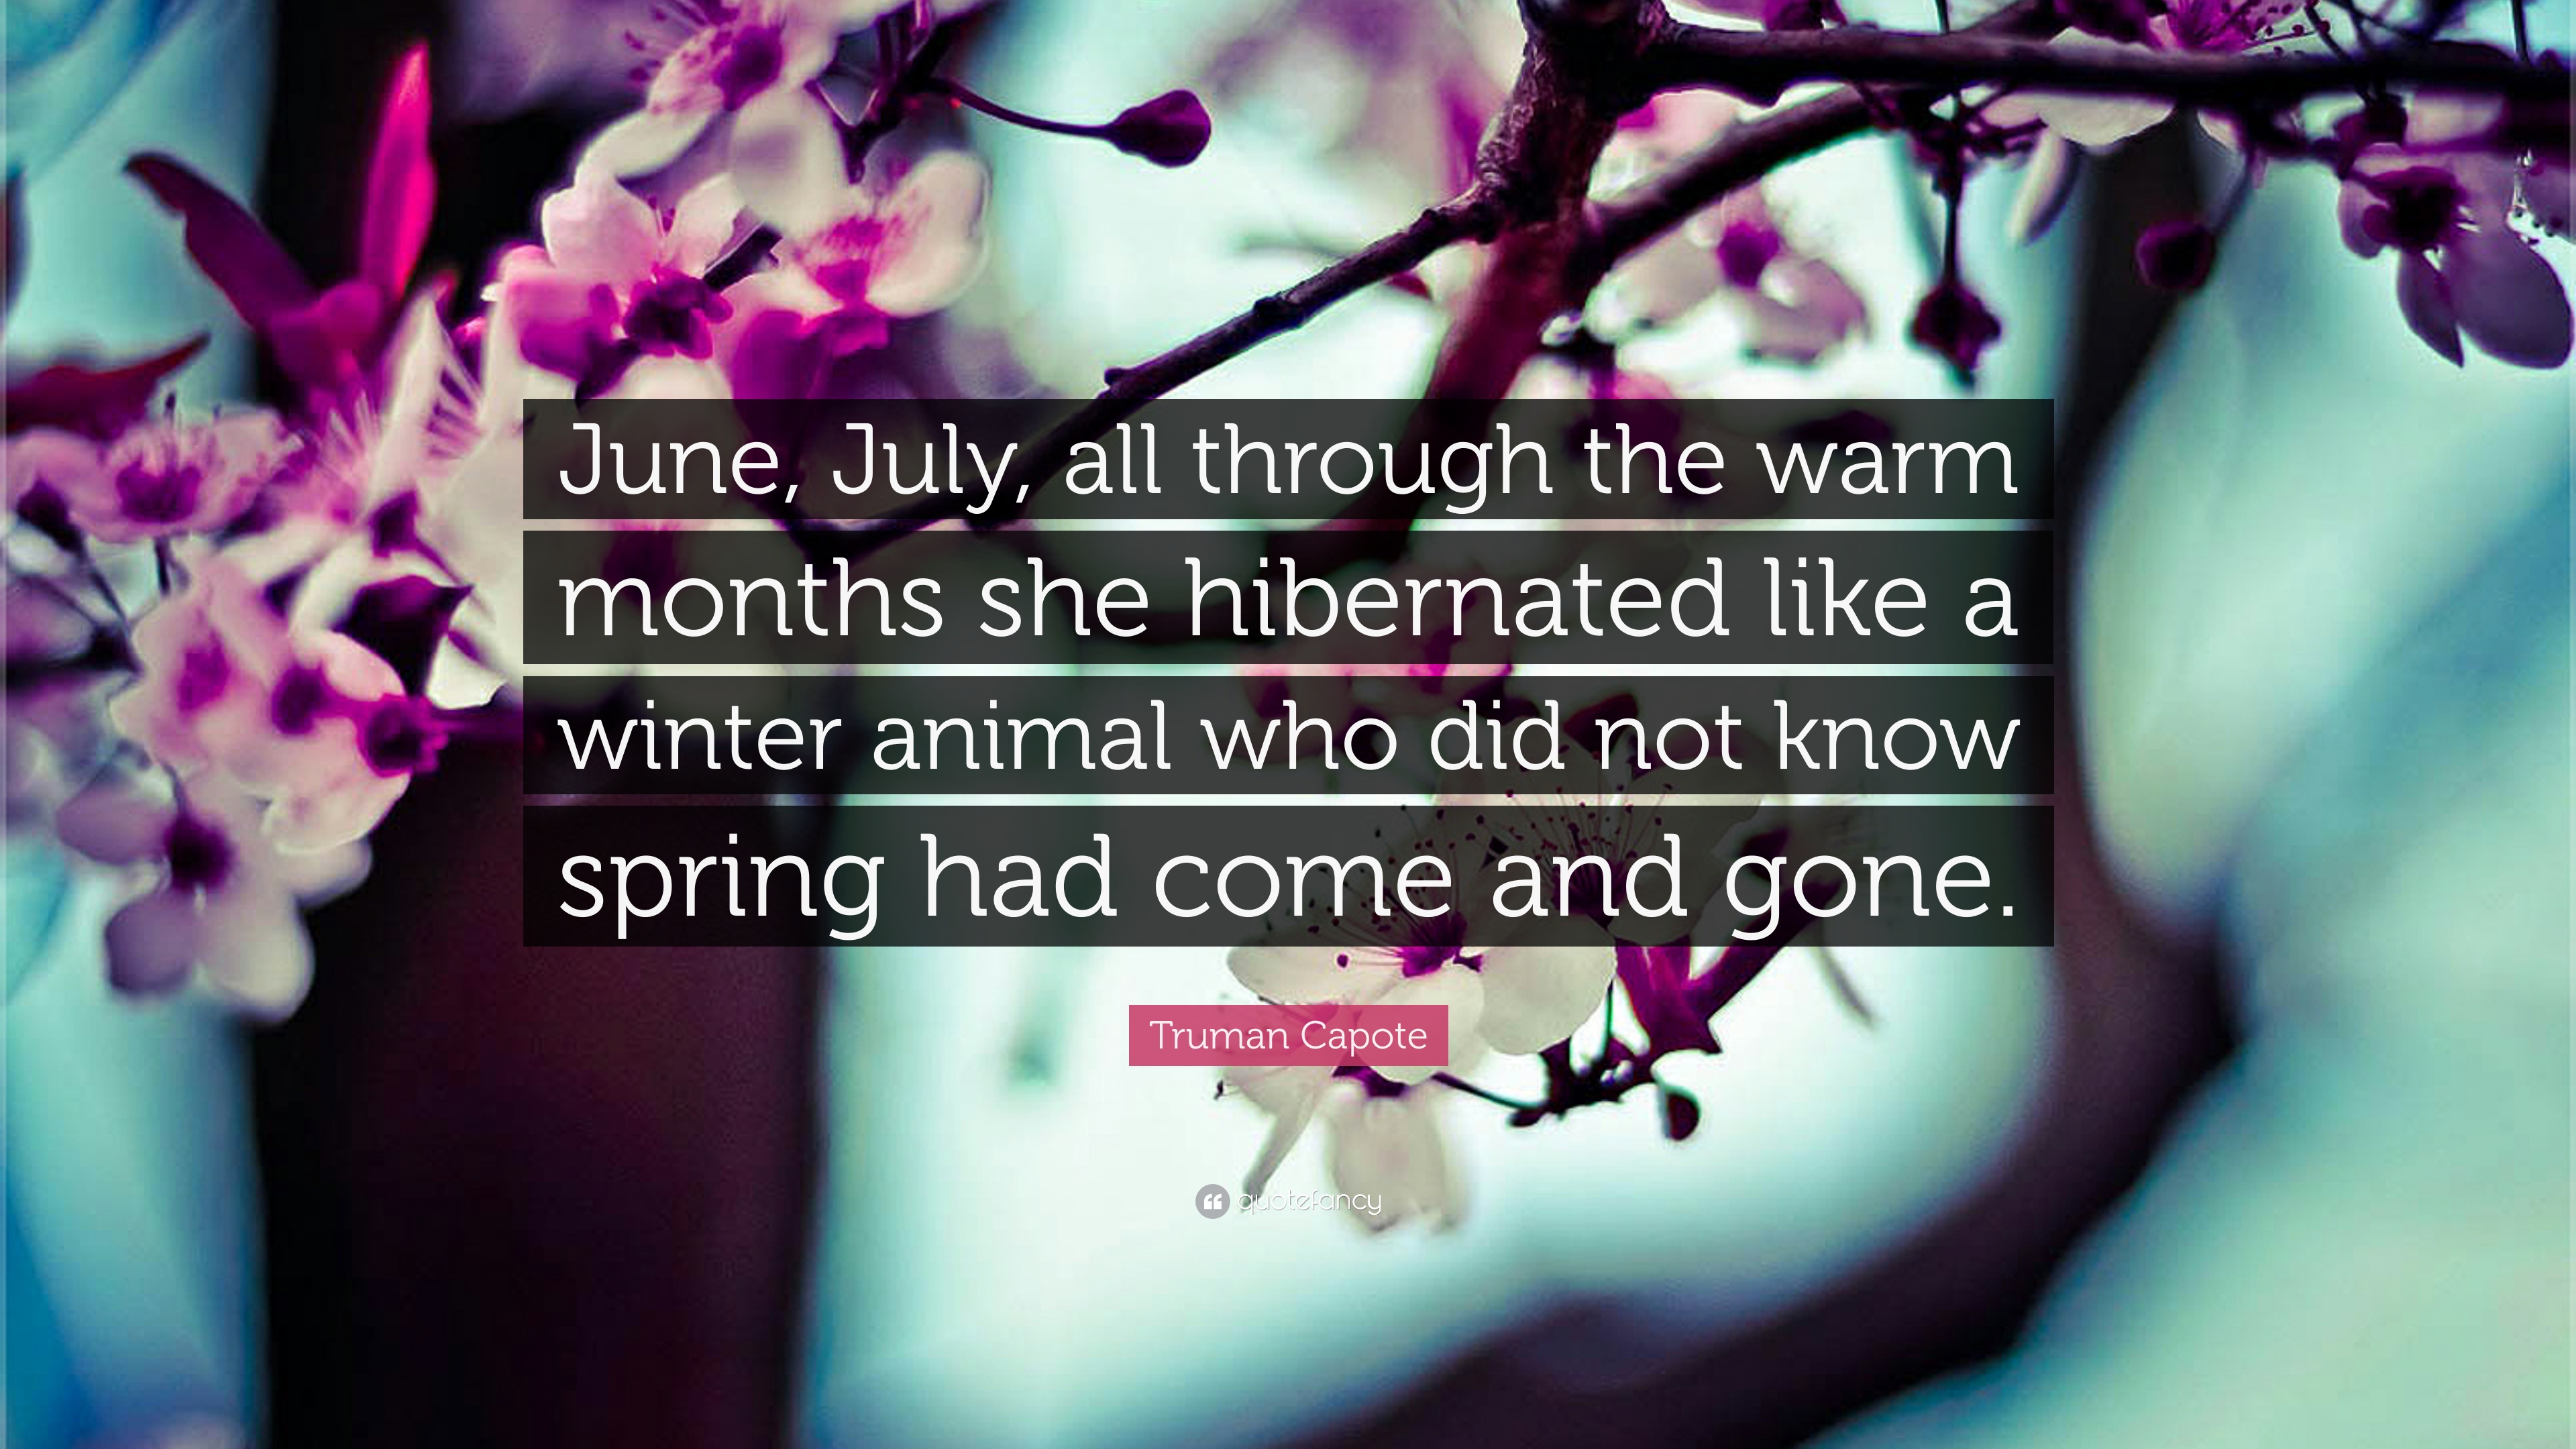 Truman Capote Quote: “June, July, allm months she